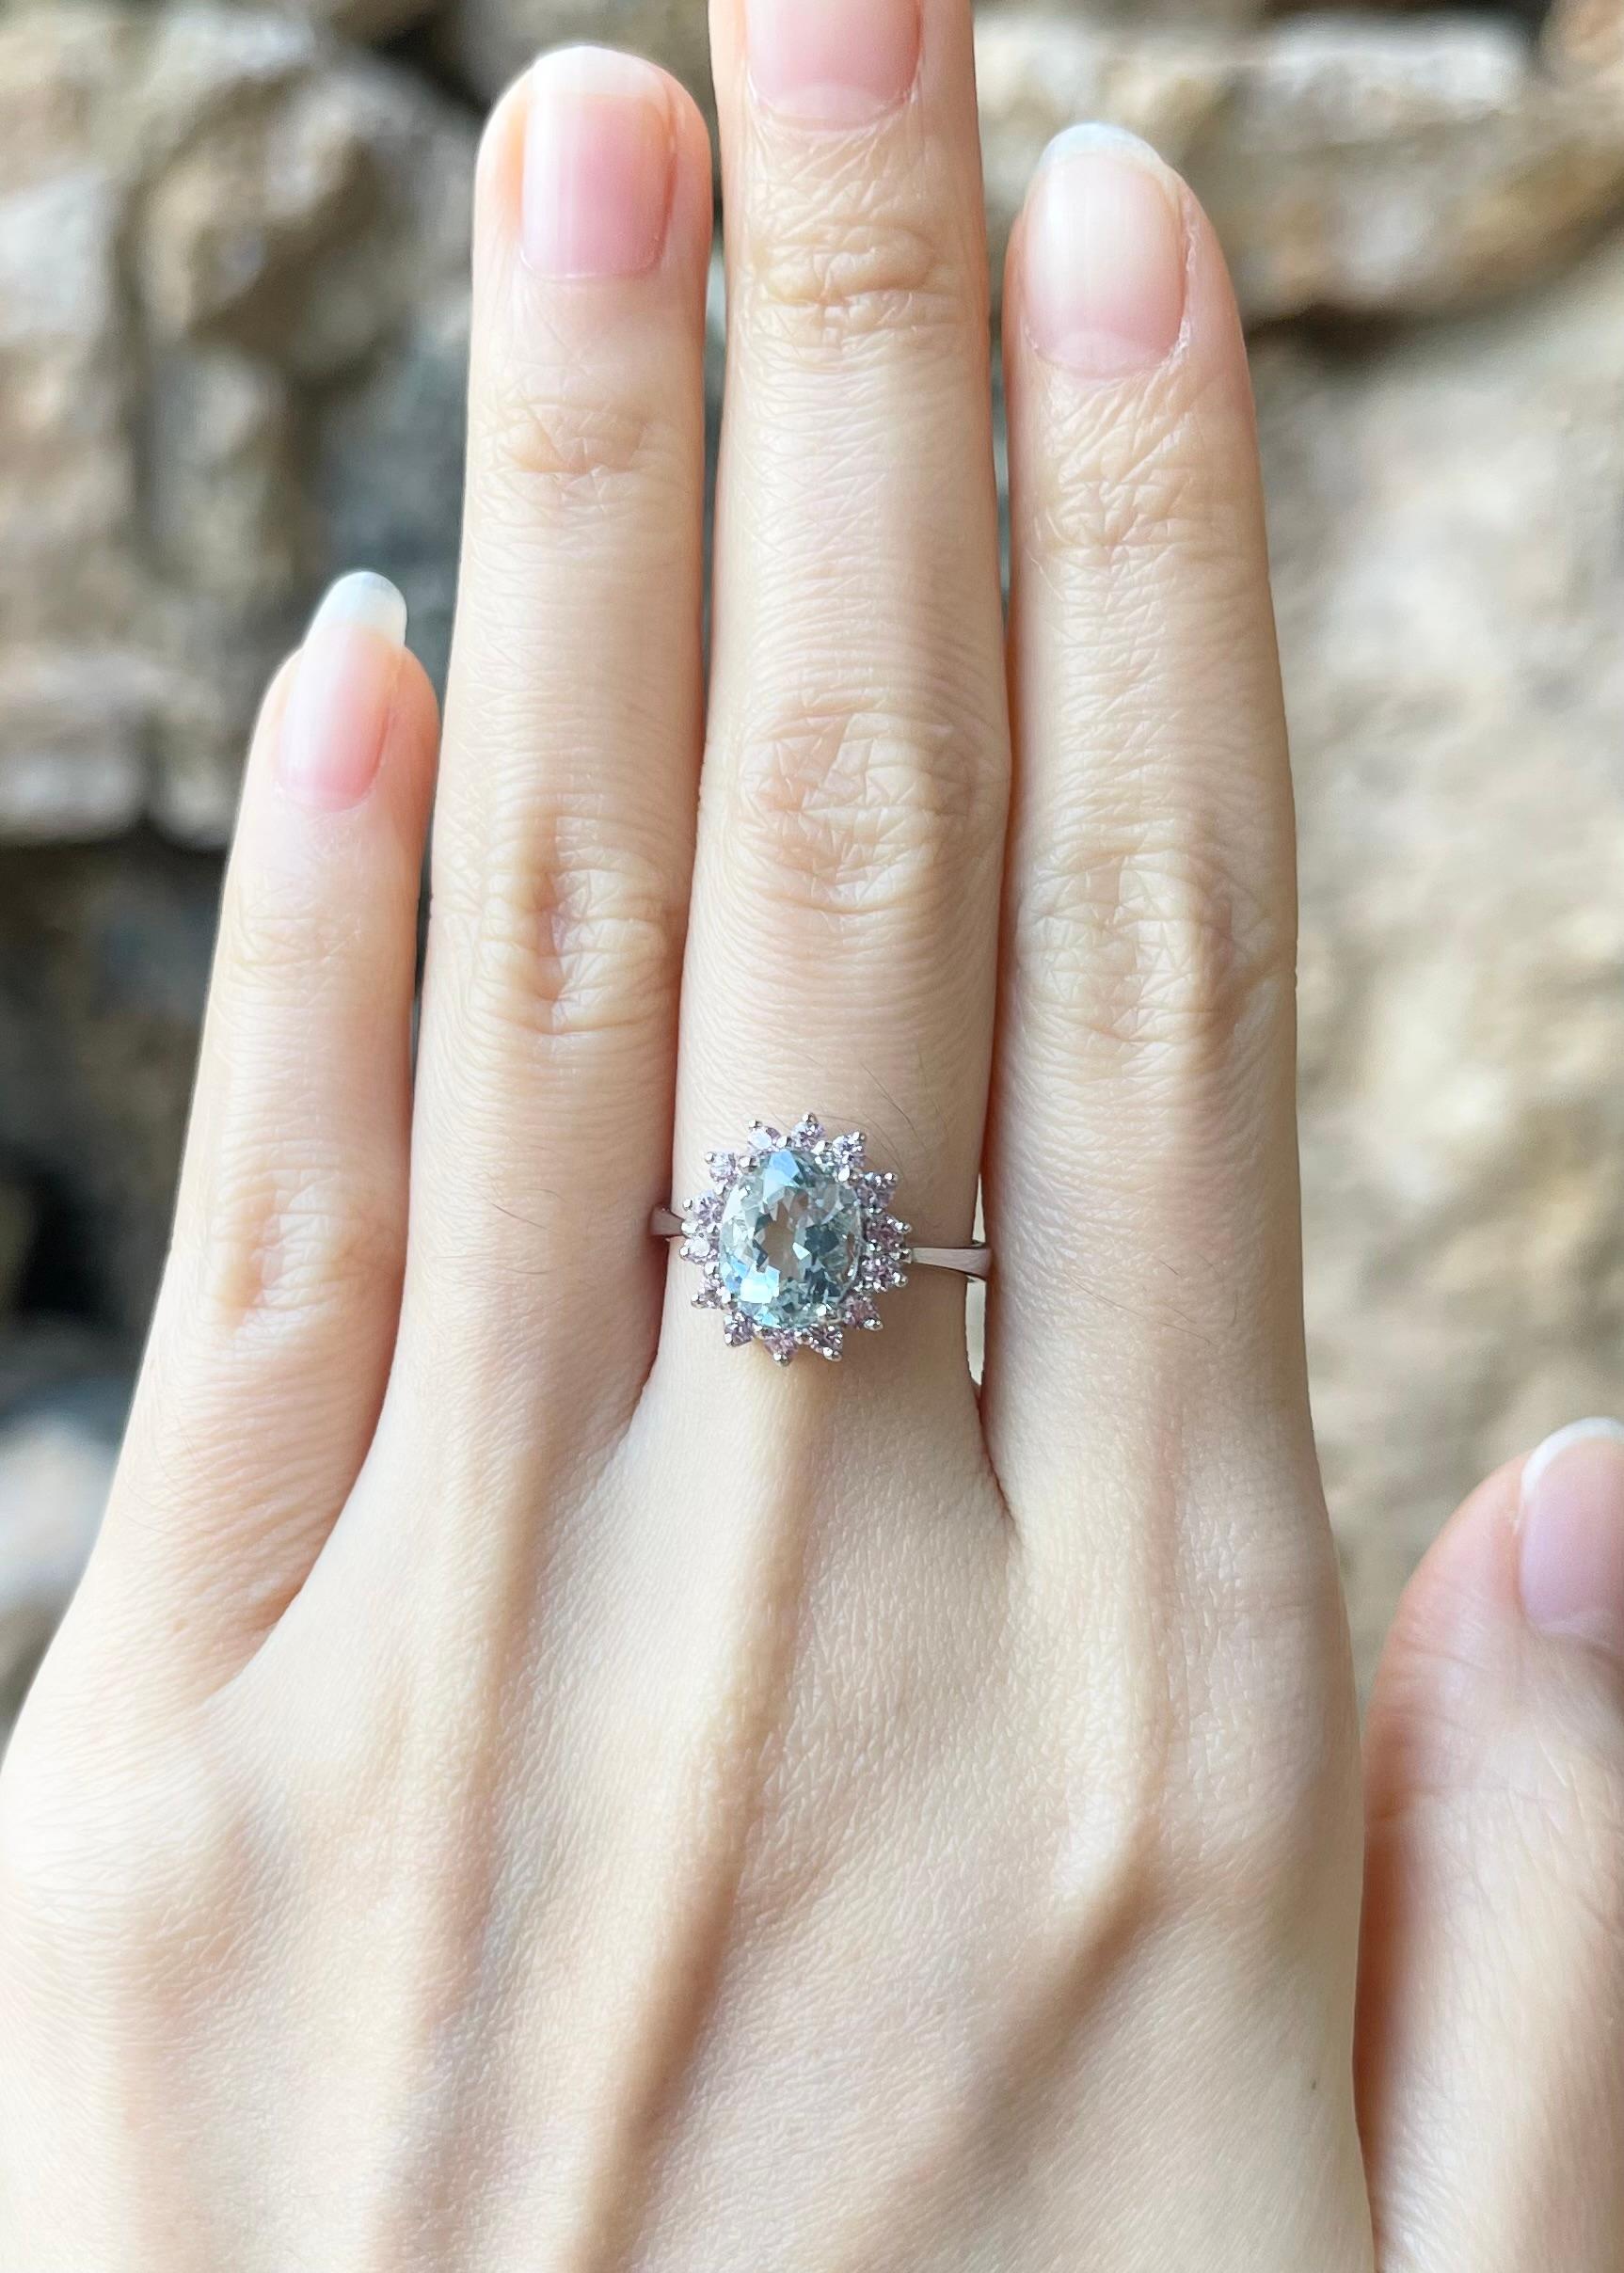 Aquamarine 1.93 carats with Pink Sapphire 0.45 carat Ring set in 14K White Gold Settings

Width:  1.2 cm 
Length: 1.4 cm
Ring Size: 52
Total Weight: 3.94 grams

